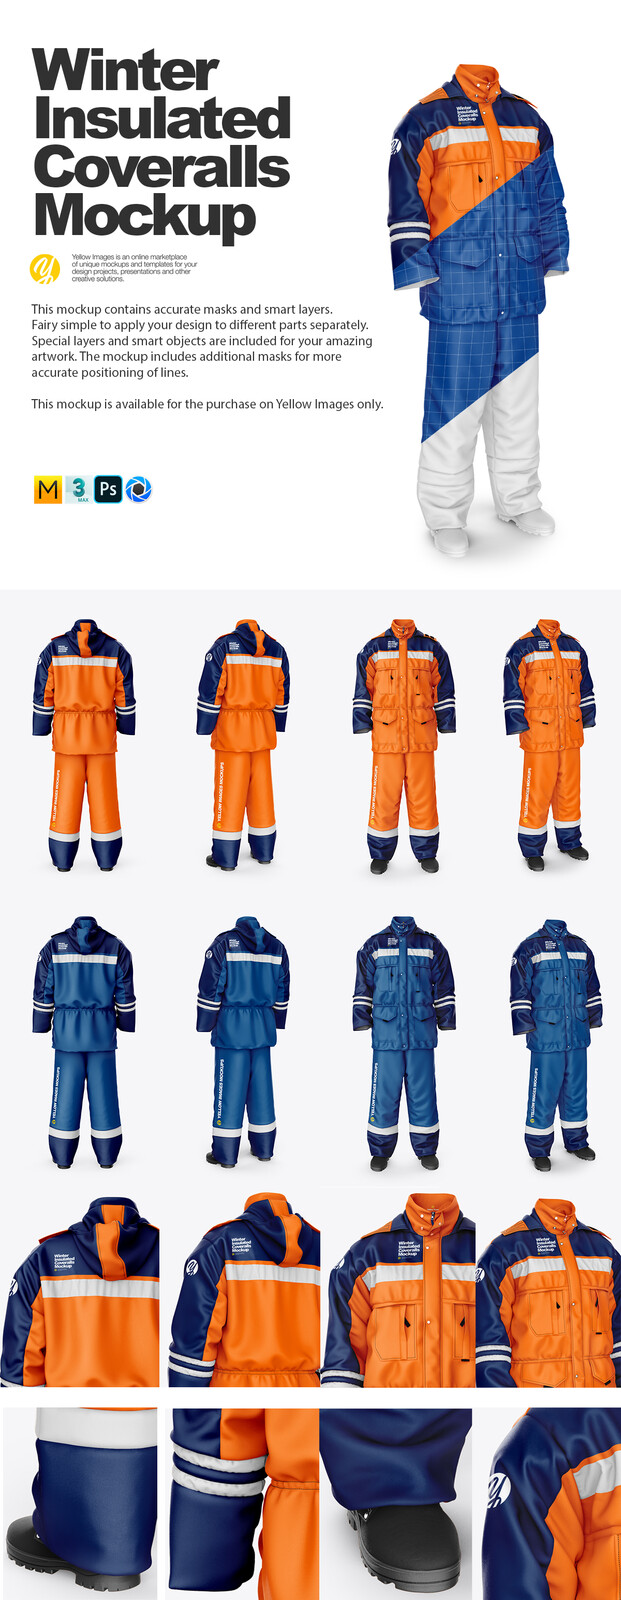 Download Artstation Winter Insulated Coveralls Mockup Andrey Yeskov A K A Rhino Yellowimages Mockups